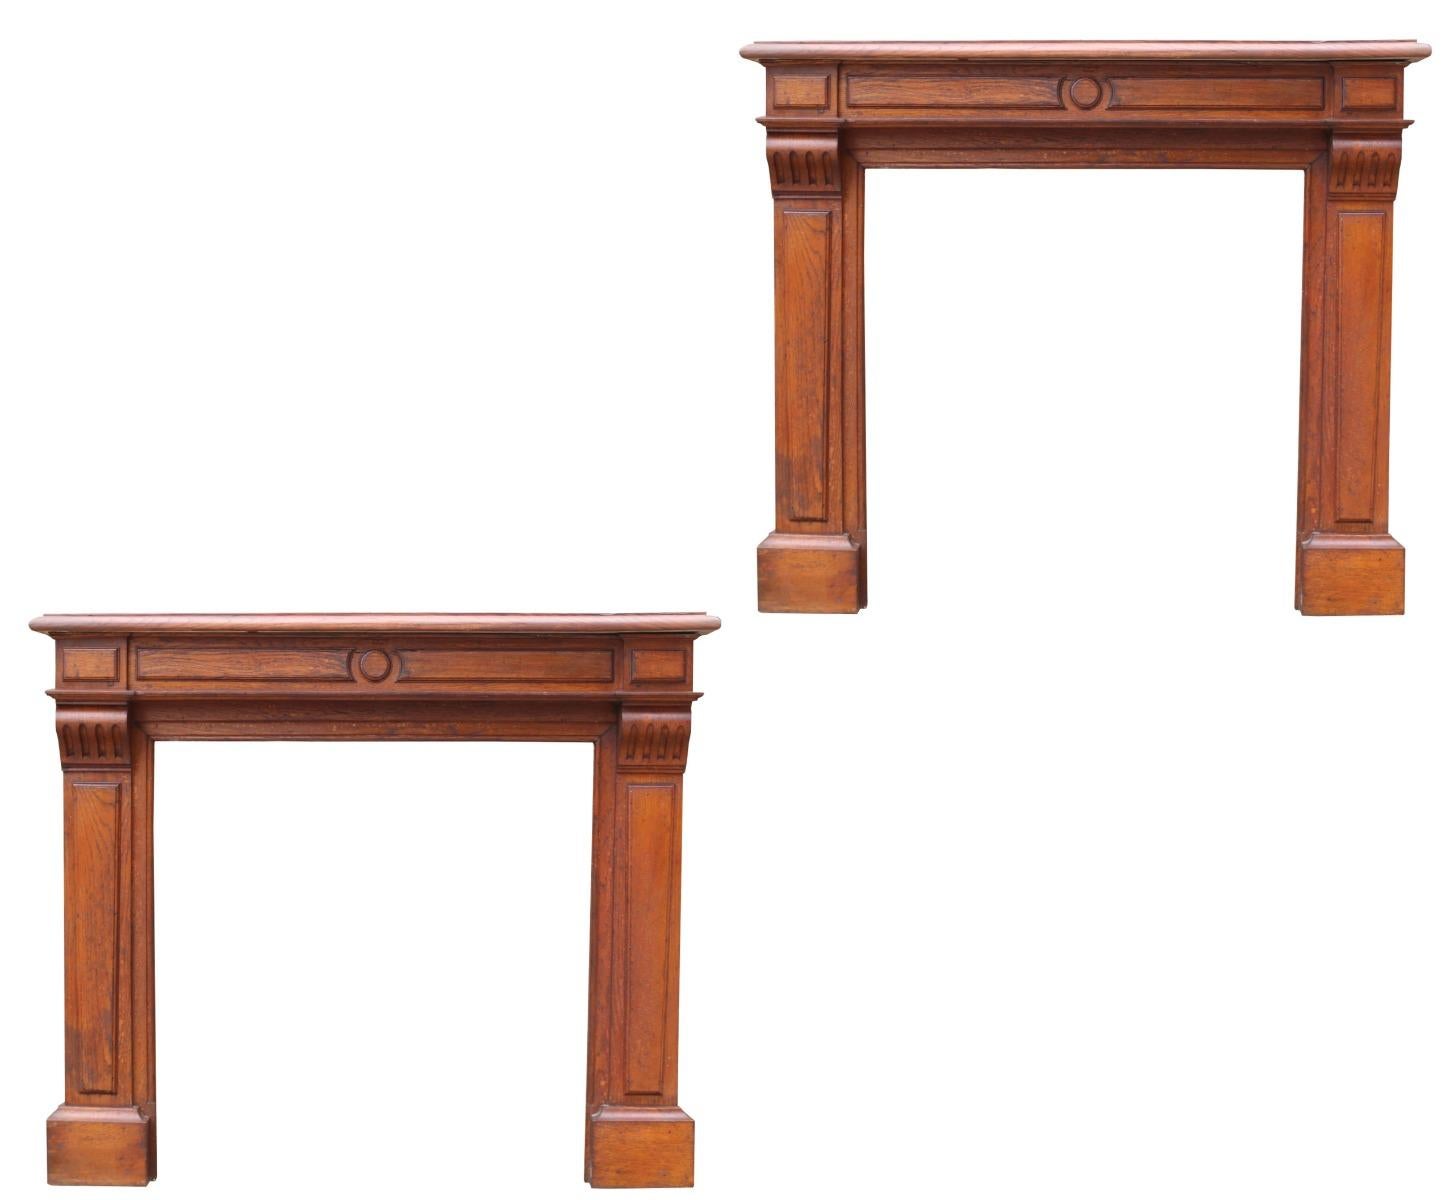 A pair of good quality matching carved oak Louis XVI style fire surrounds.

£1,595 for the pair or £875 each

Additional Dimensions

Height

1. 104.5 cm

2. 105 cm

Width

1. 121 cm

2. 121.5 cm

Depth

1. 15 cm

2. 14.5